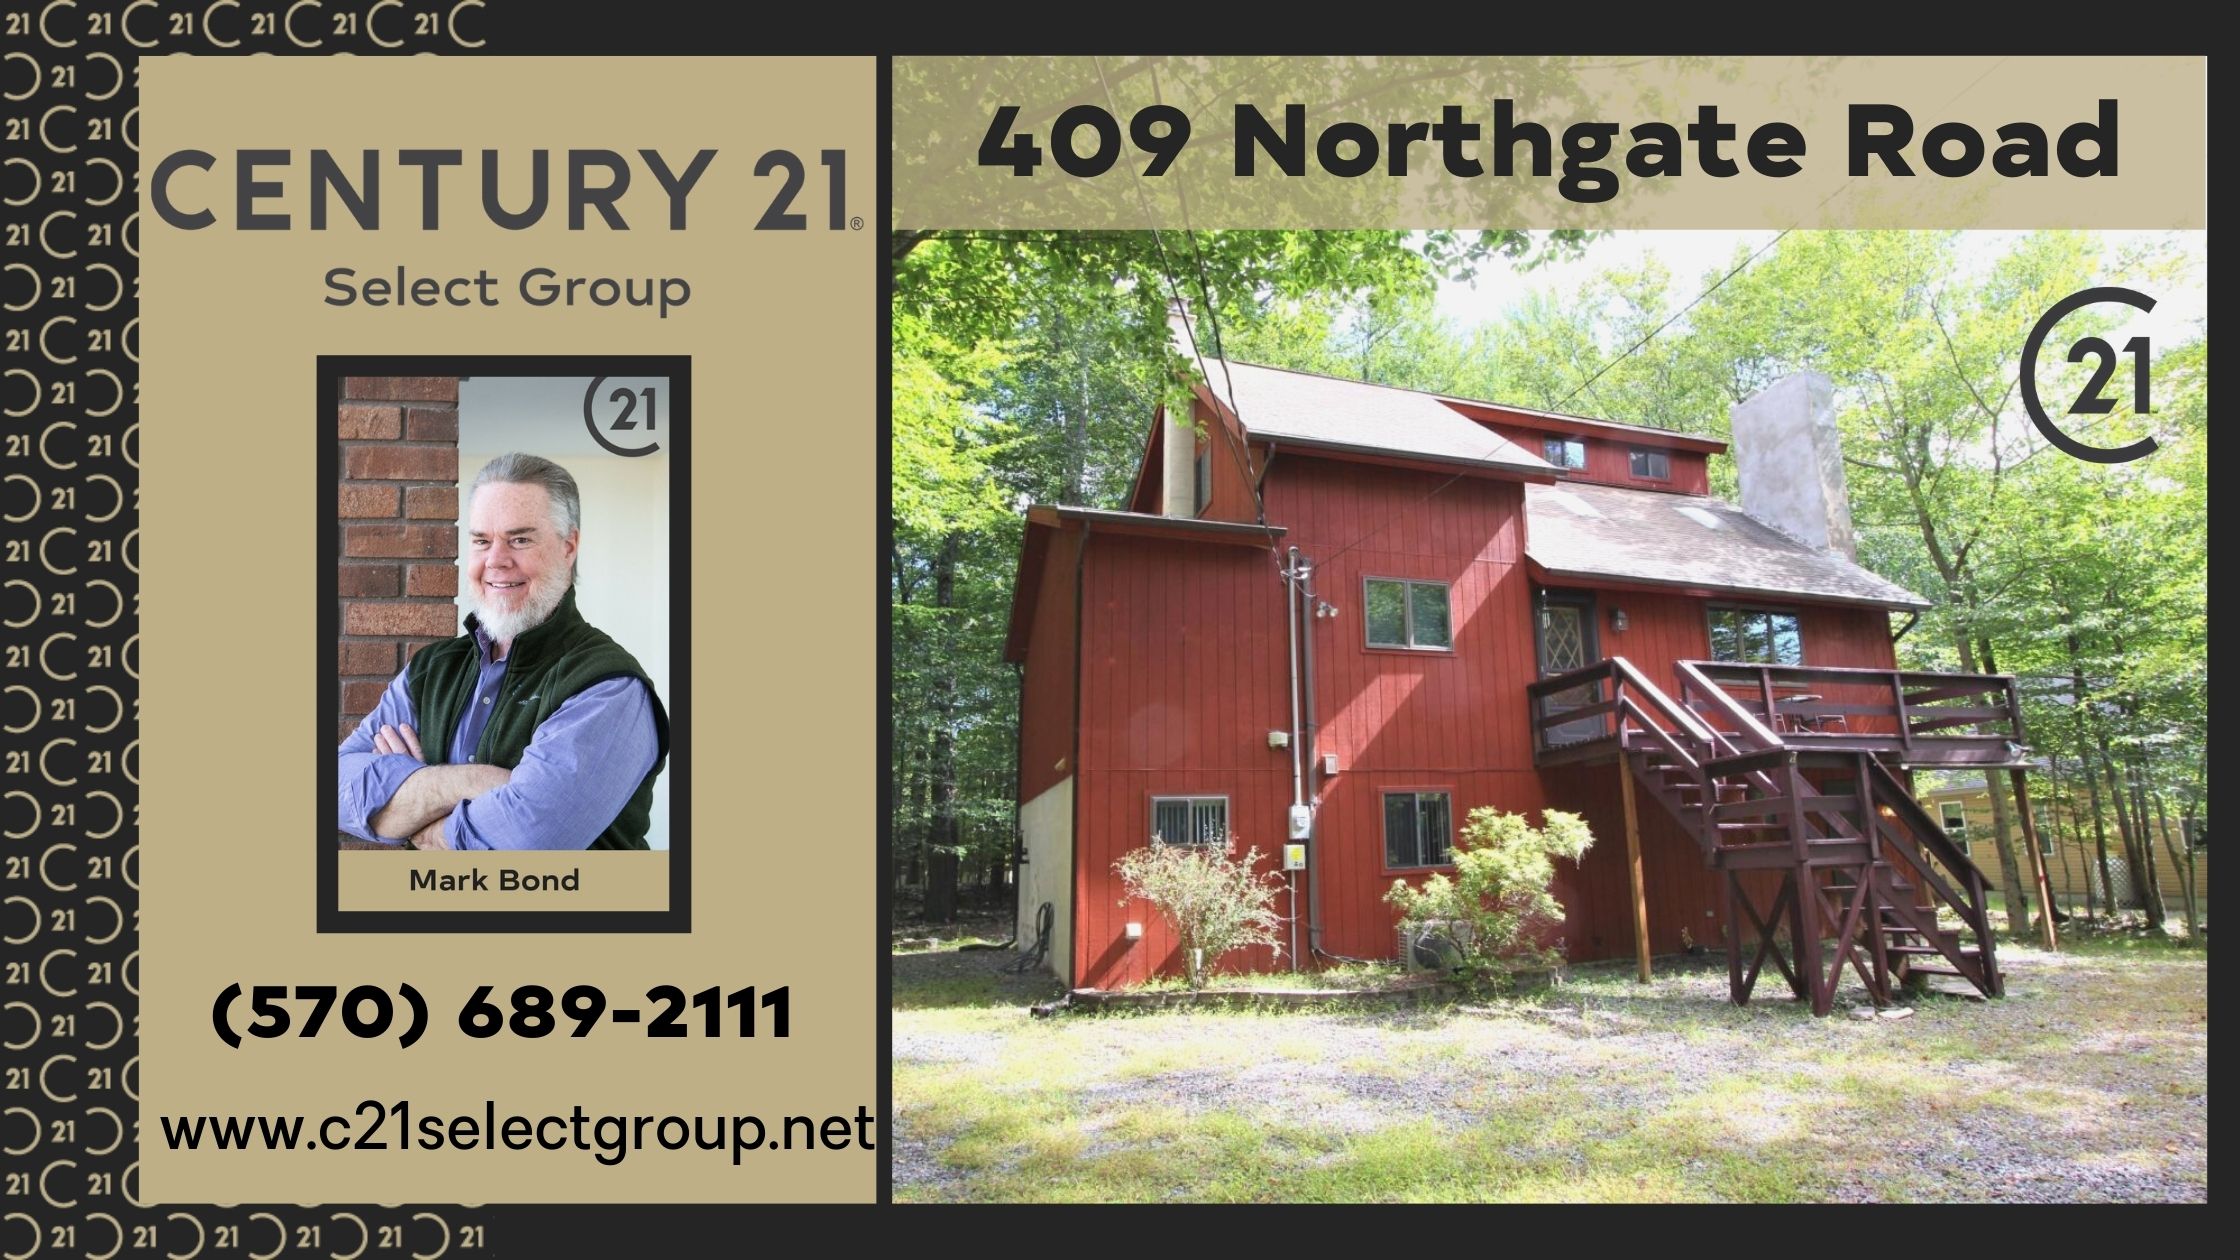 409 Northgate Road: 4 Bedroom Hideout Contemporary